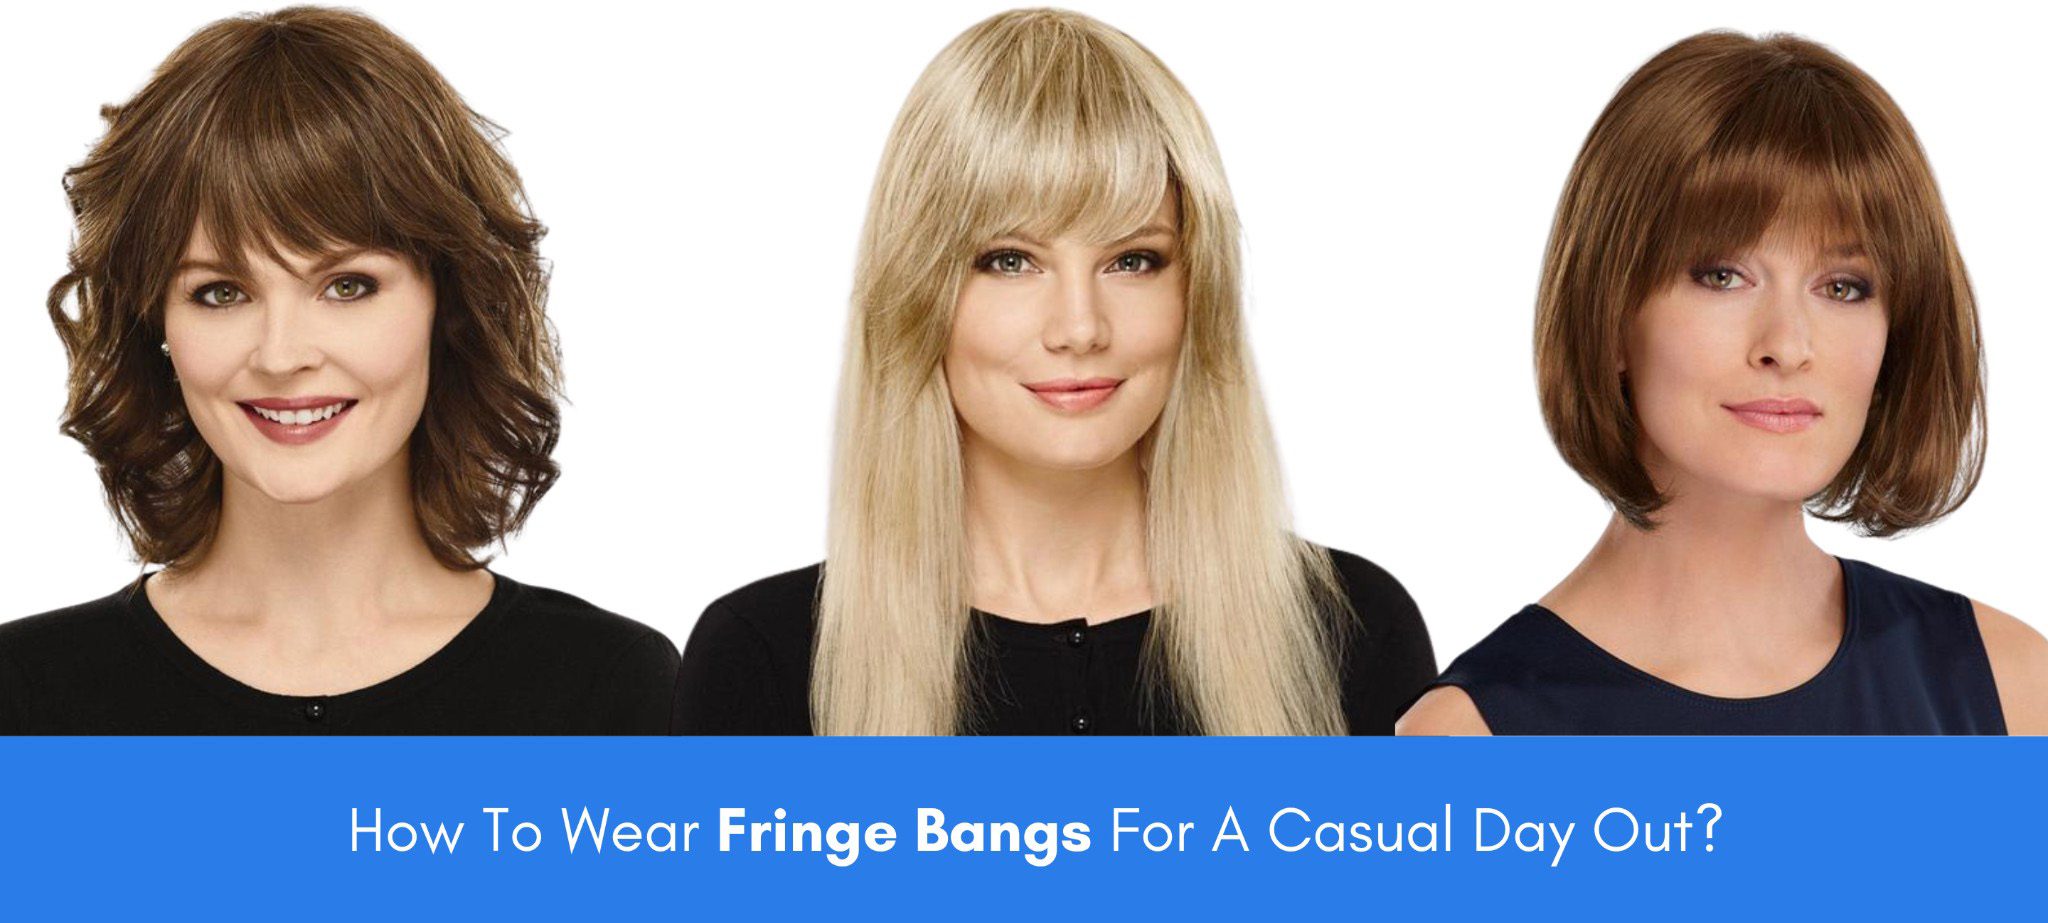 How To Wear Fringe Bangs For A Casual Day Out?